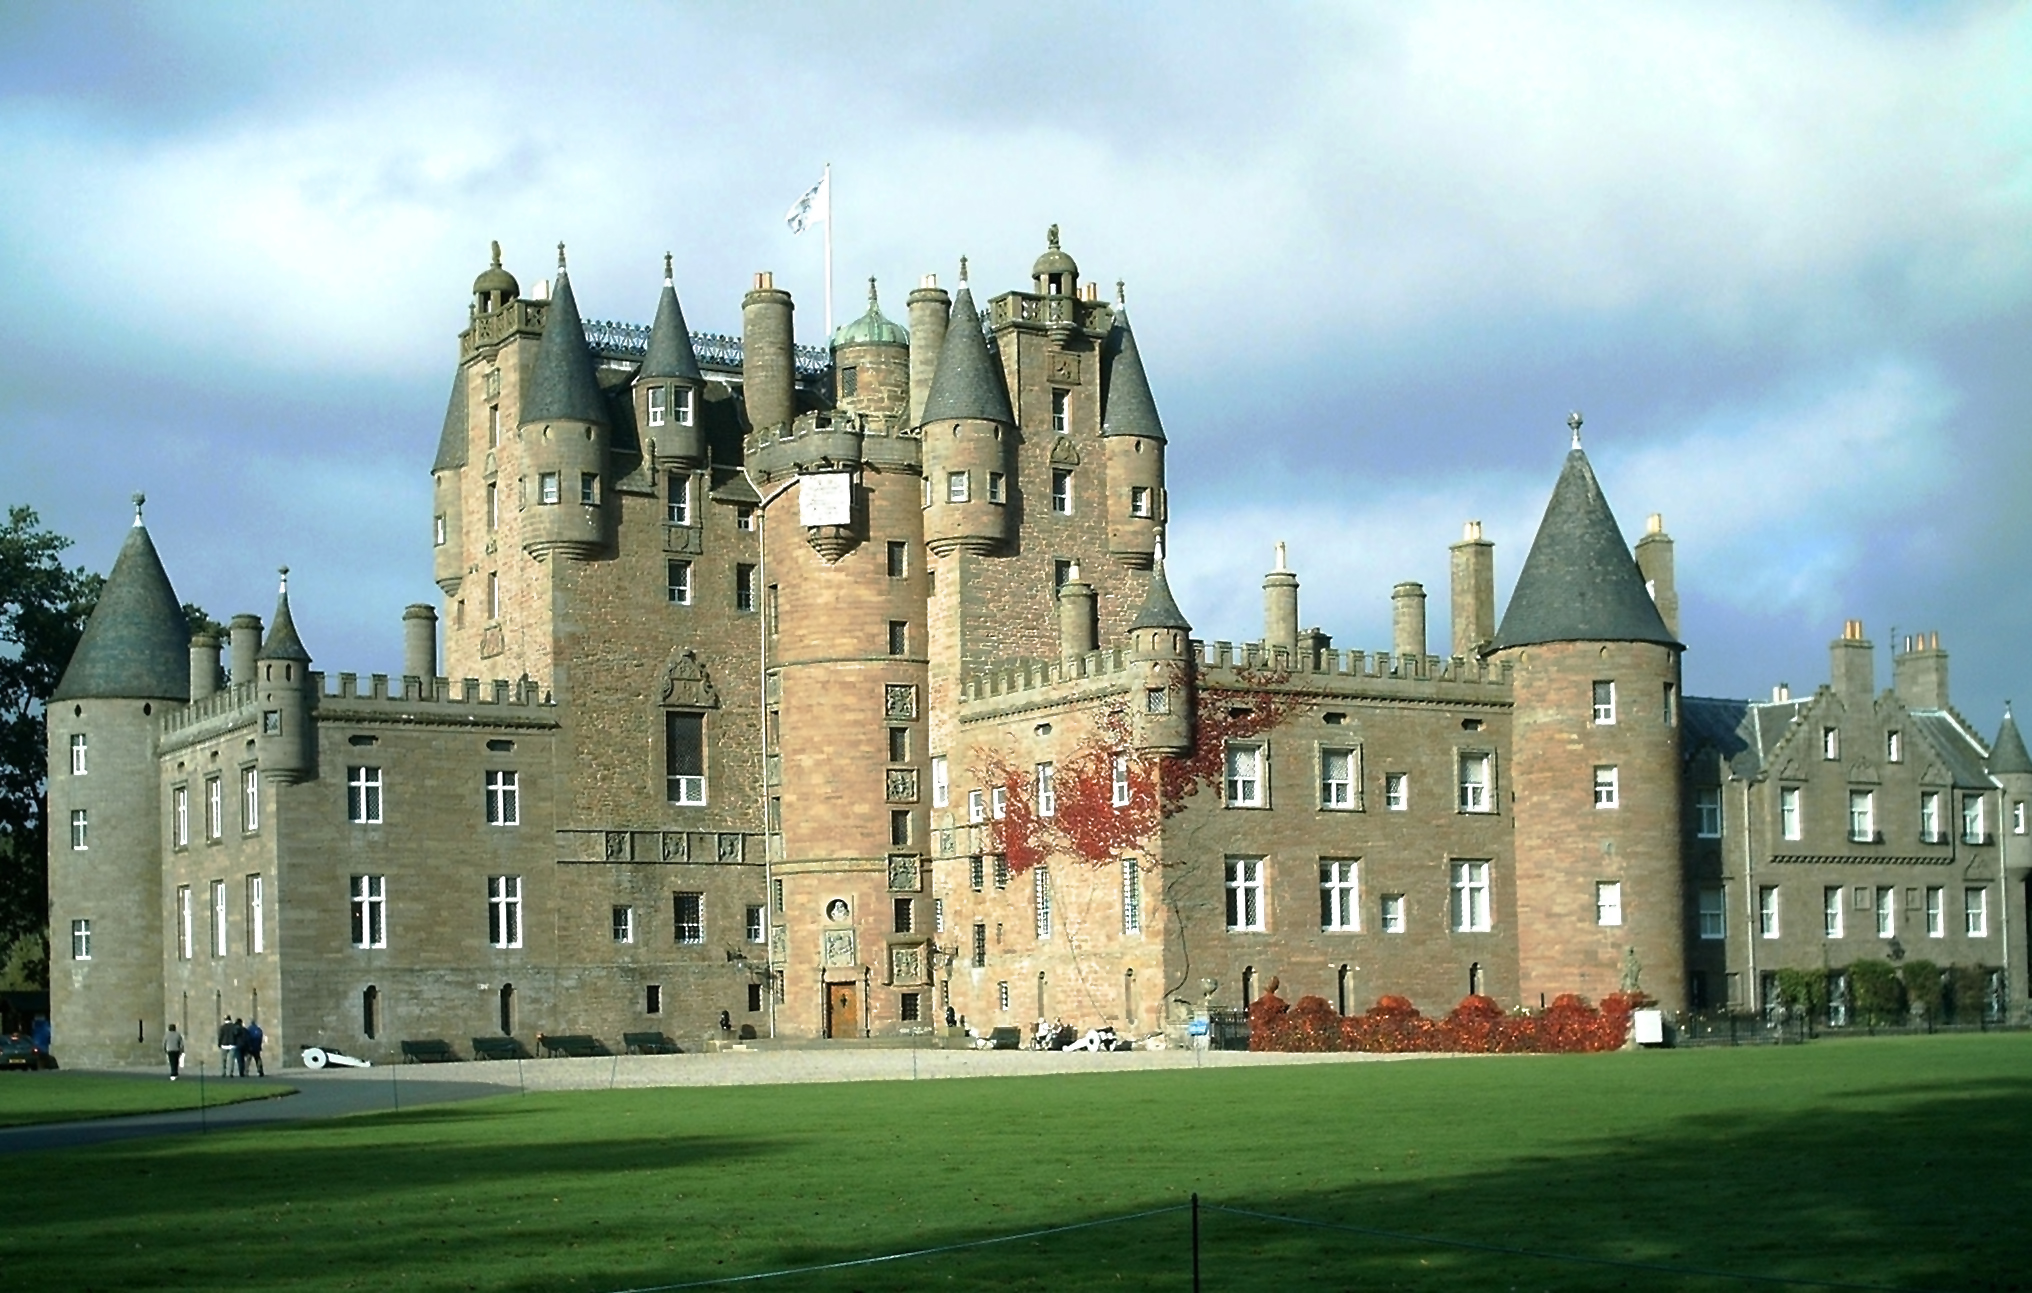 Glamis Castle, Angus & Dundee - Wikimedia Commons